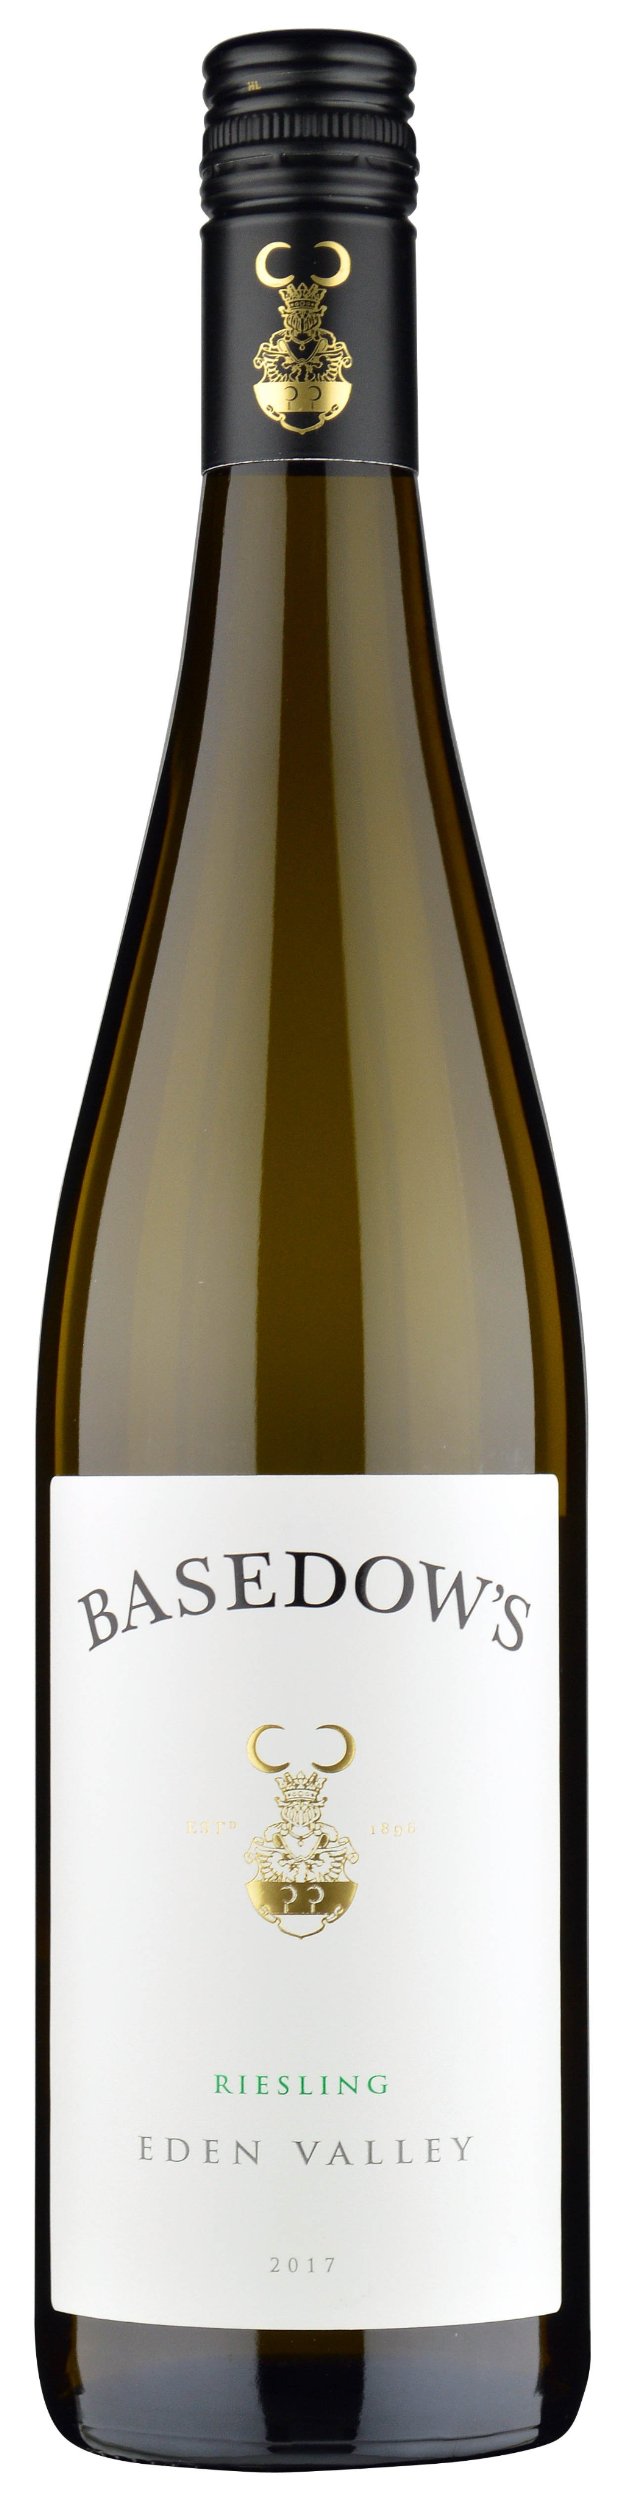 Basedow's Eden Valley Riesling 2017